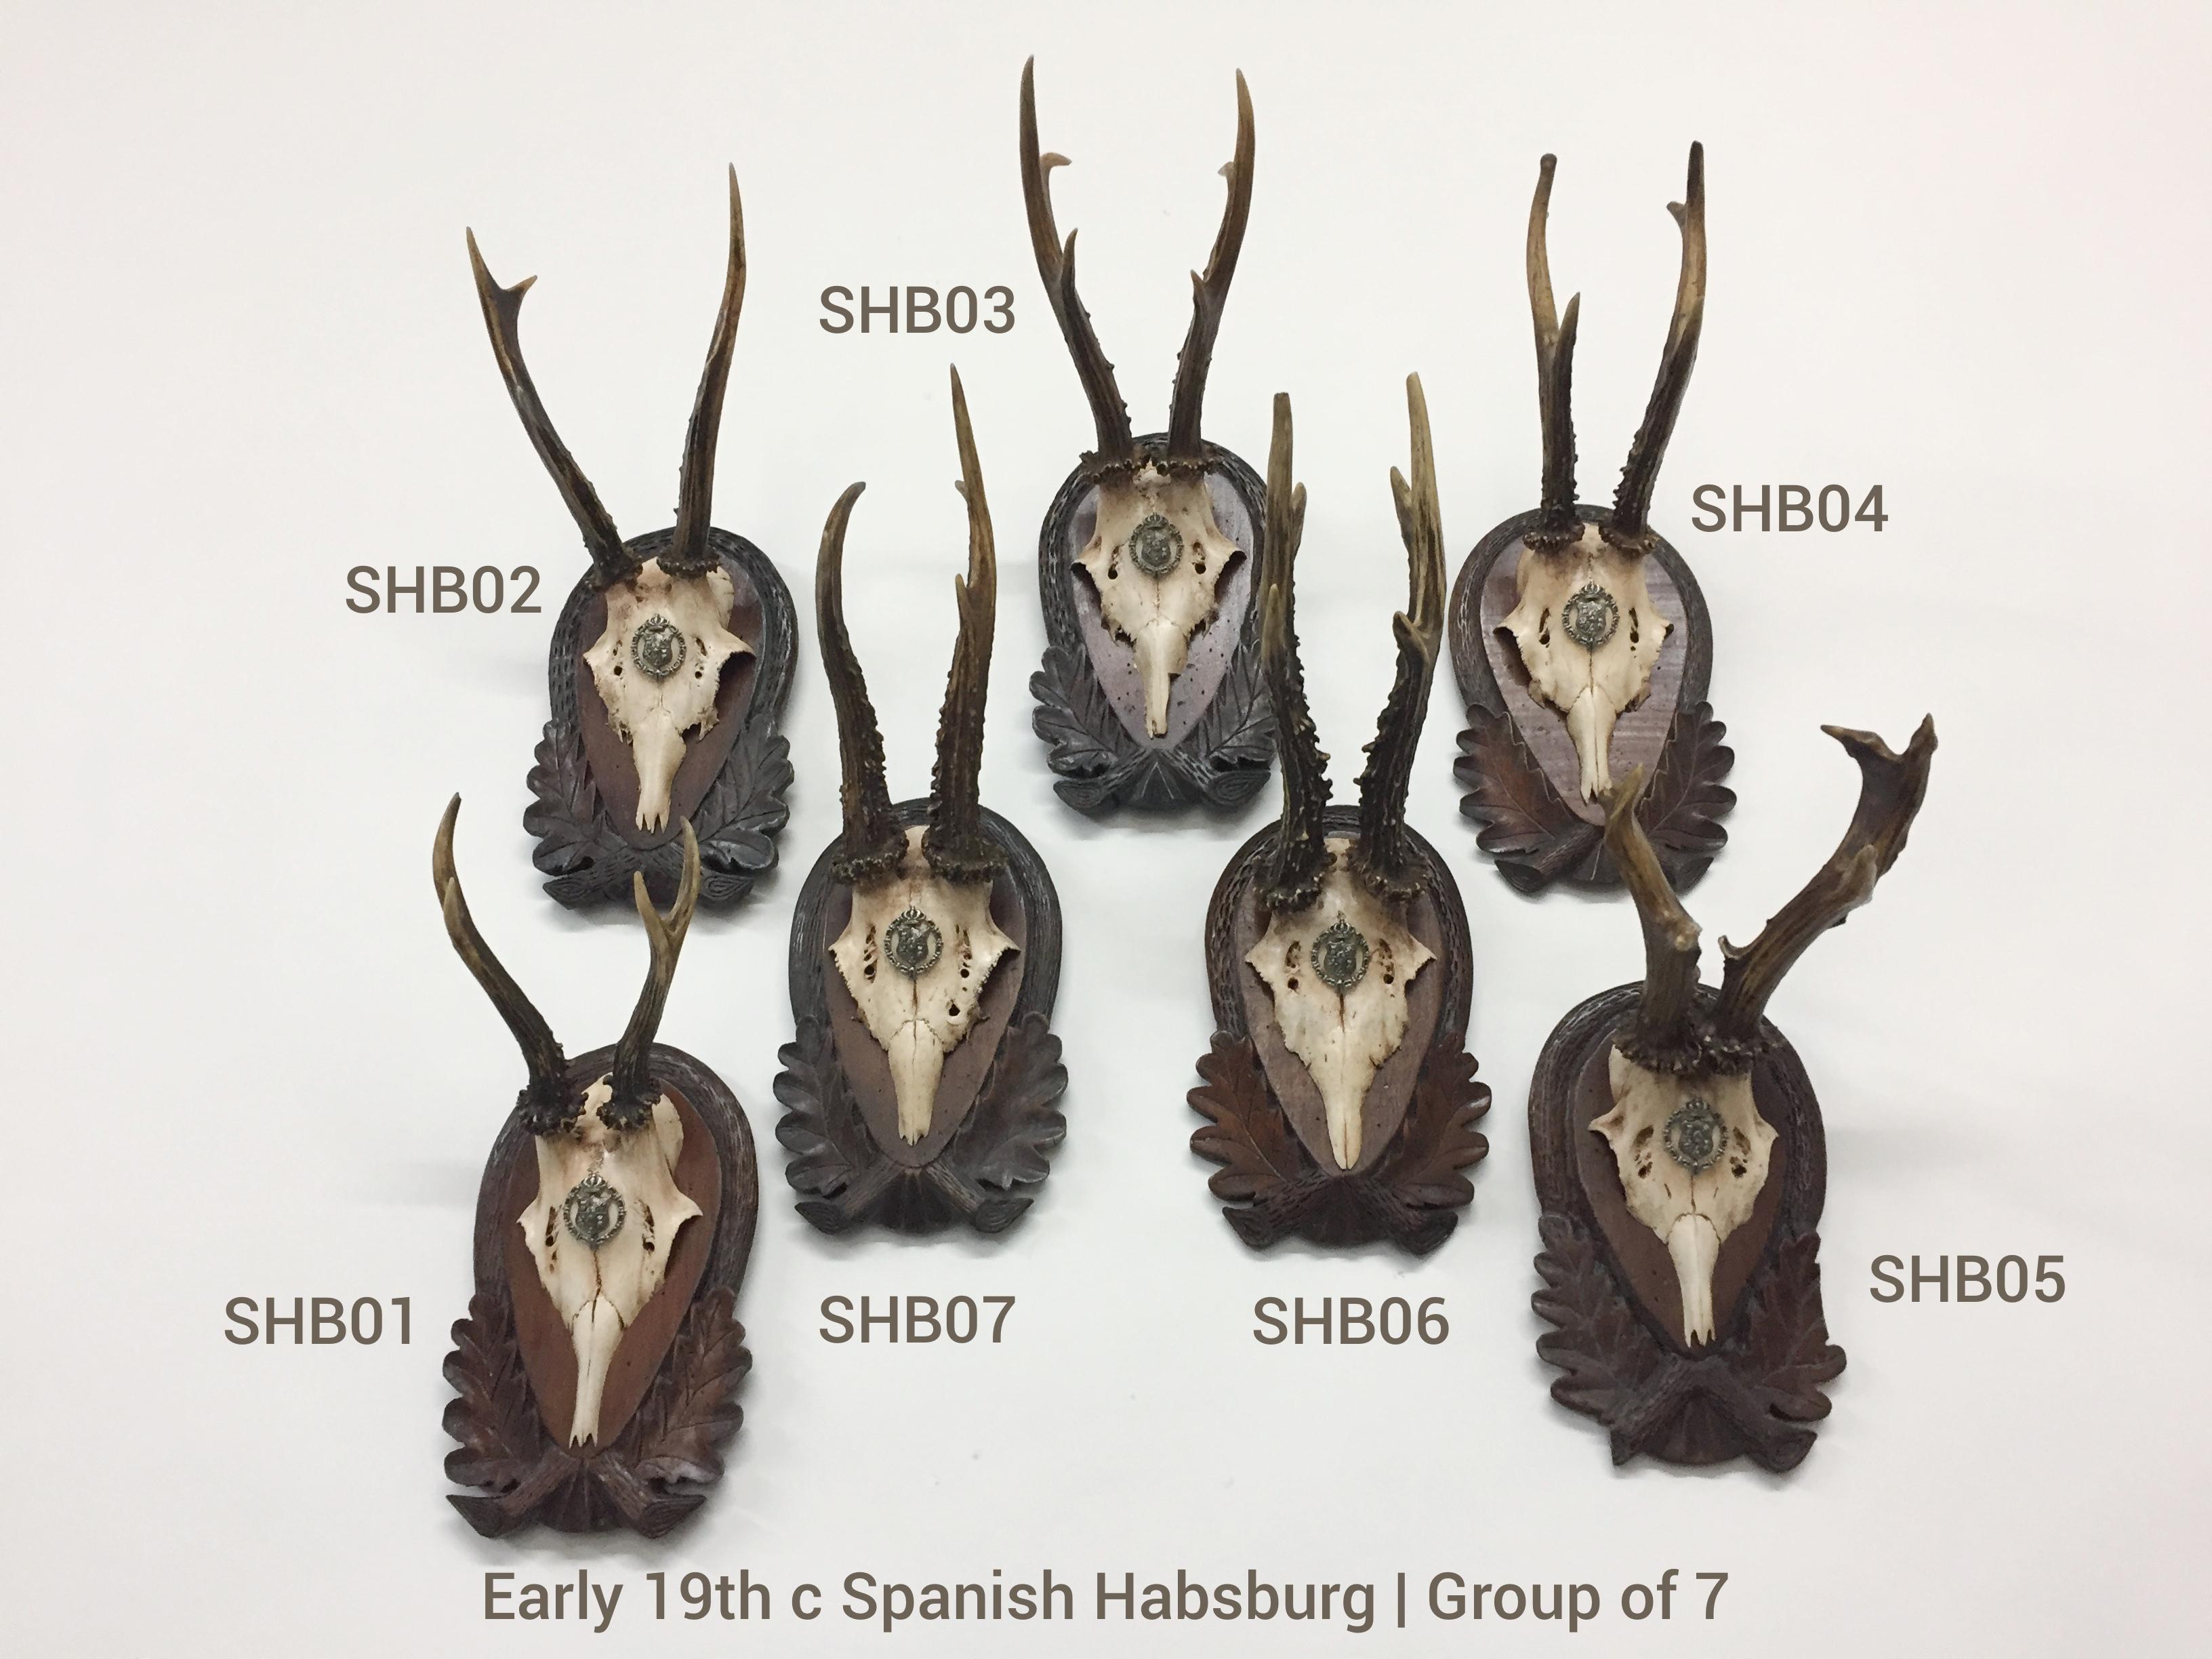 An extraordinary grouping of early 19th century Spanish Habsburg Roe trophies. Each trophy is mounted on an original, hand carved Black Forest plaque. Mounted on the cap of each trophy, just below the antlers is the wappen of Spanish Habsburg